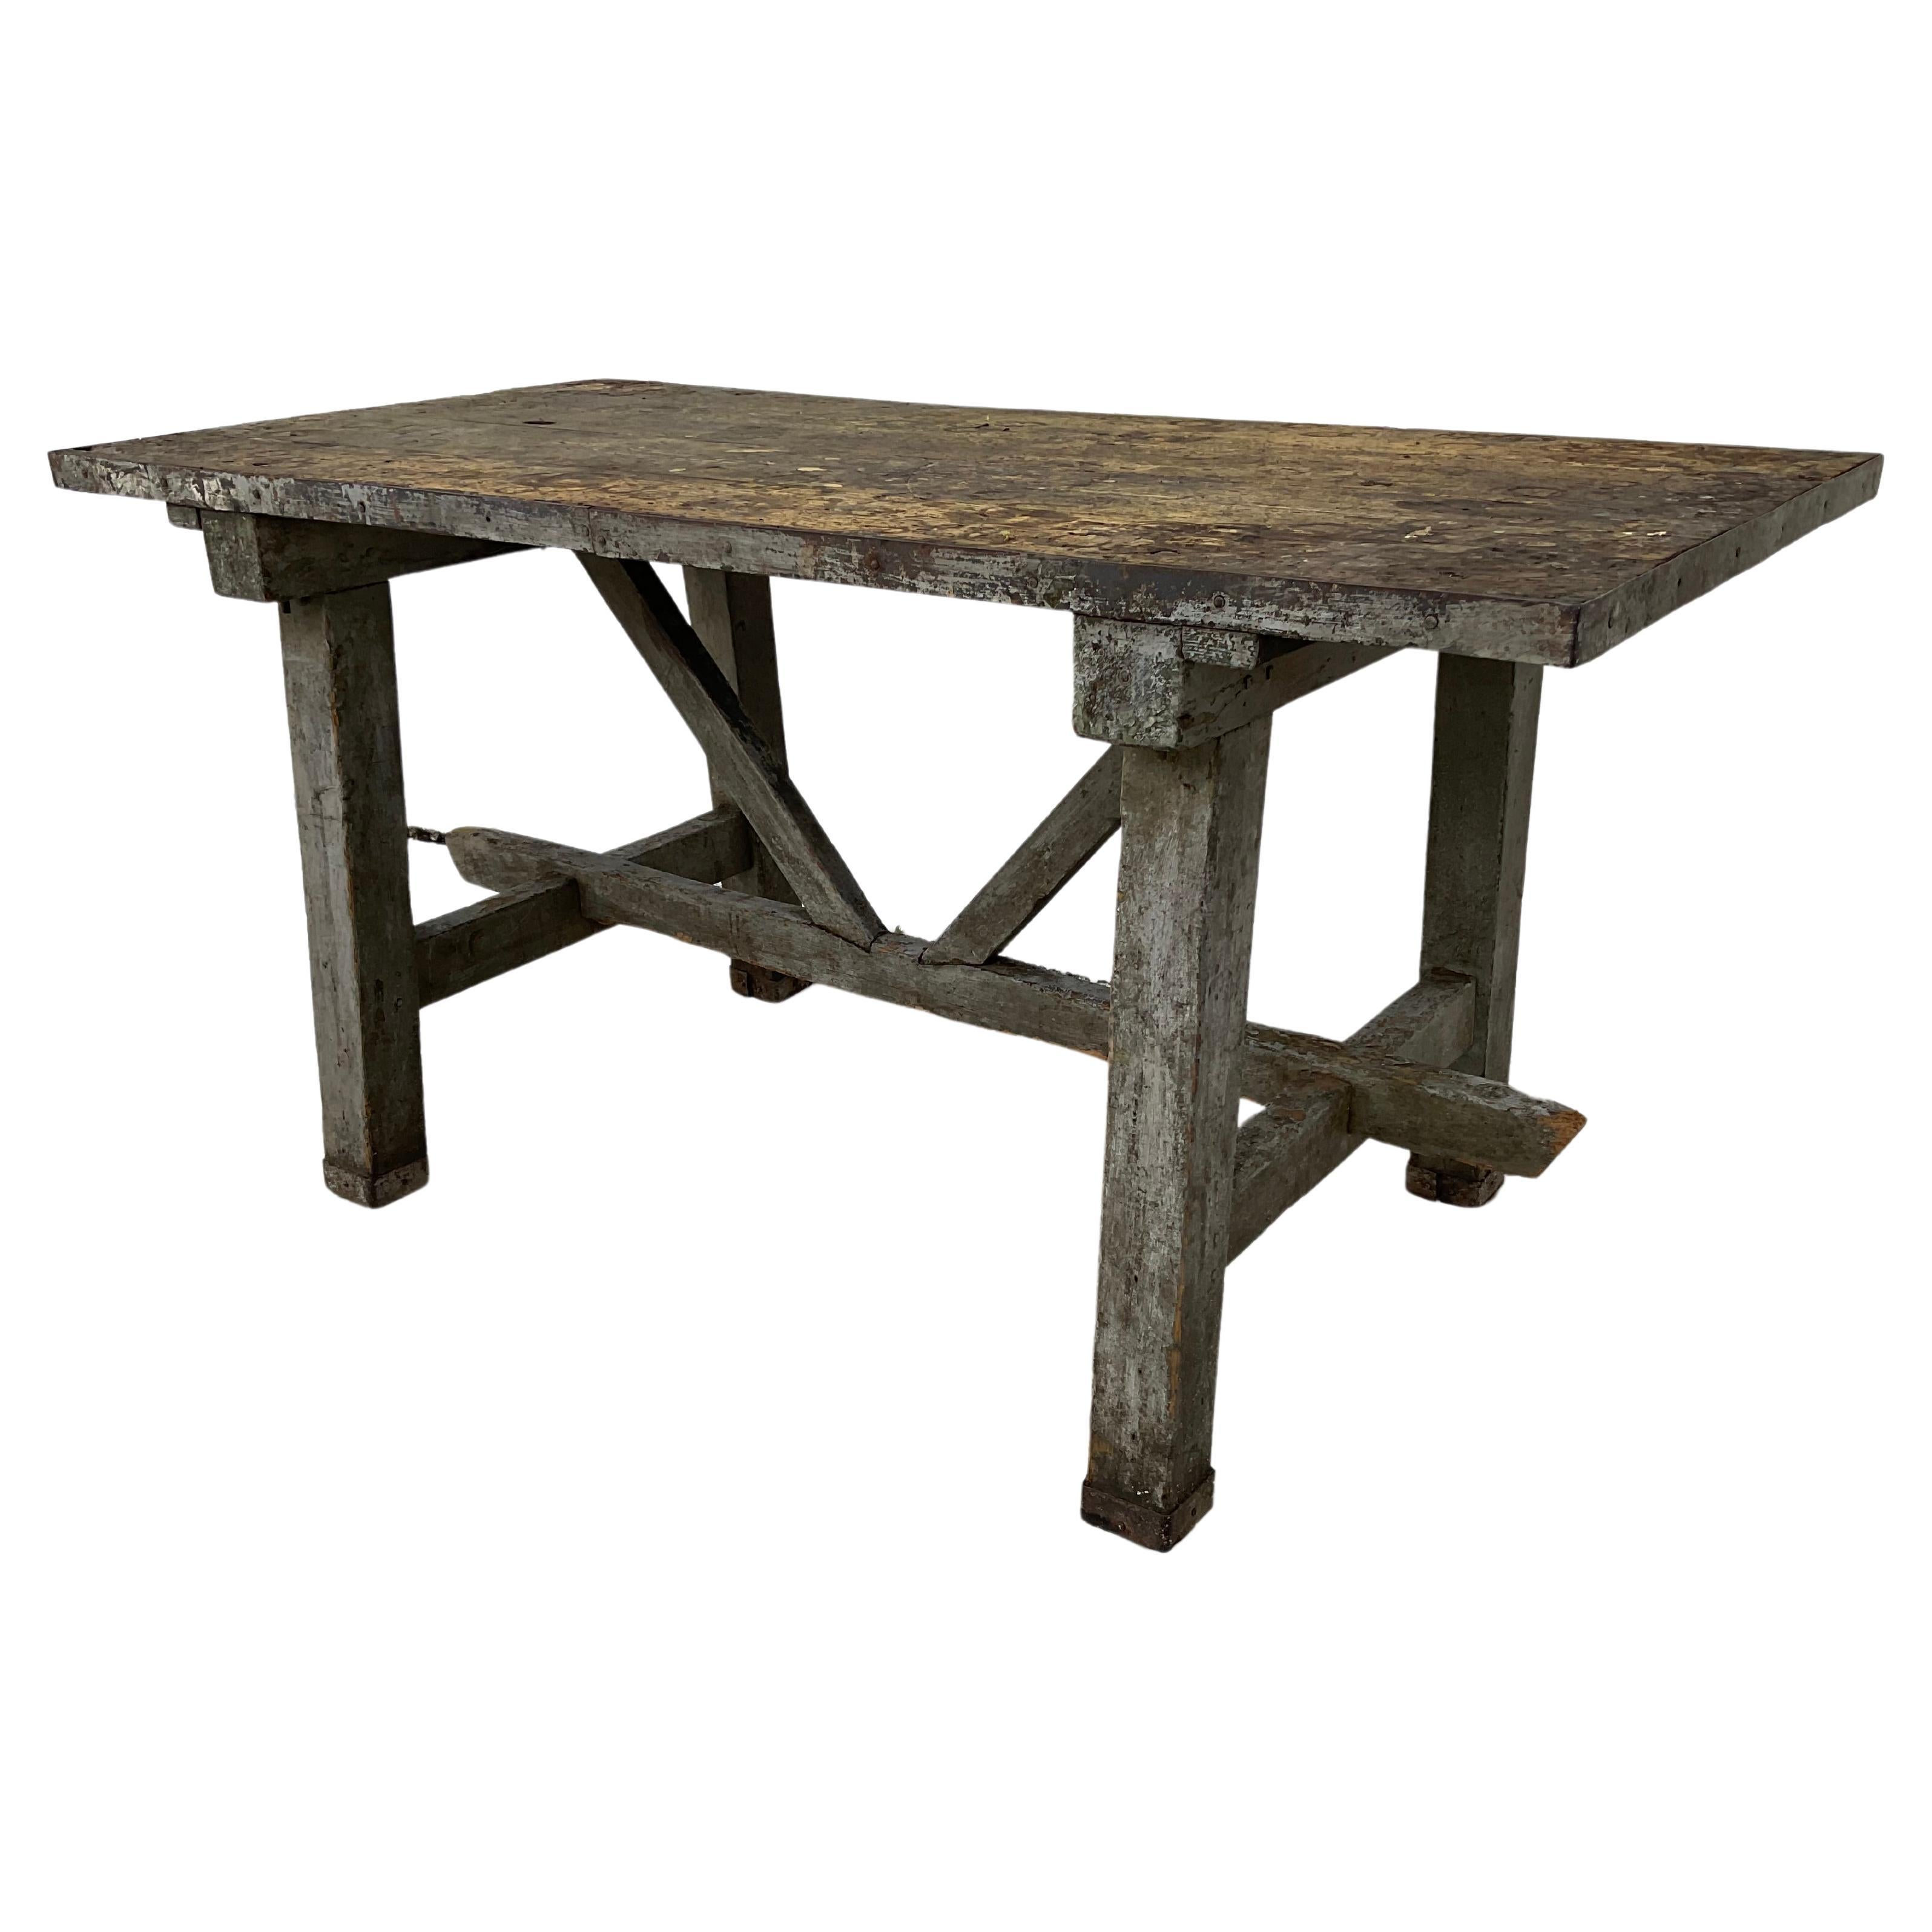 19th Century French Rustic Industrial Dining or Writing Table or Desk For Sale 3